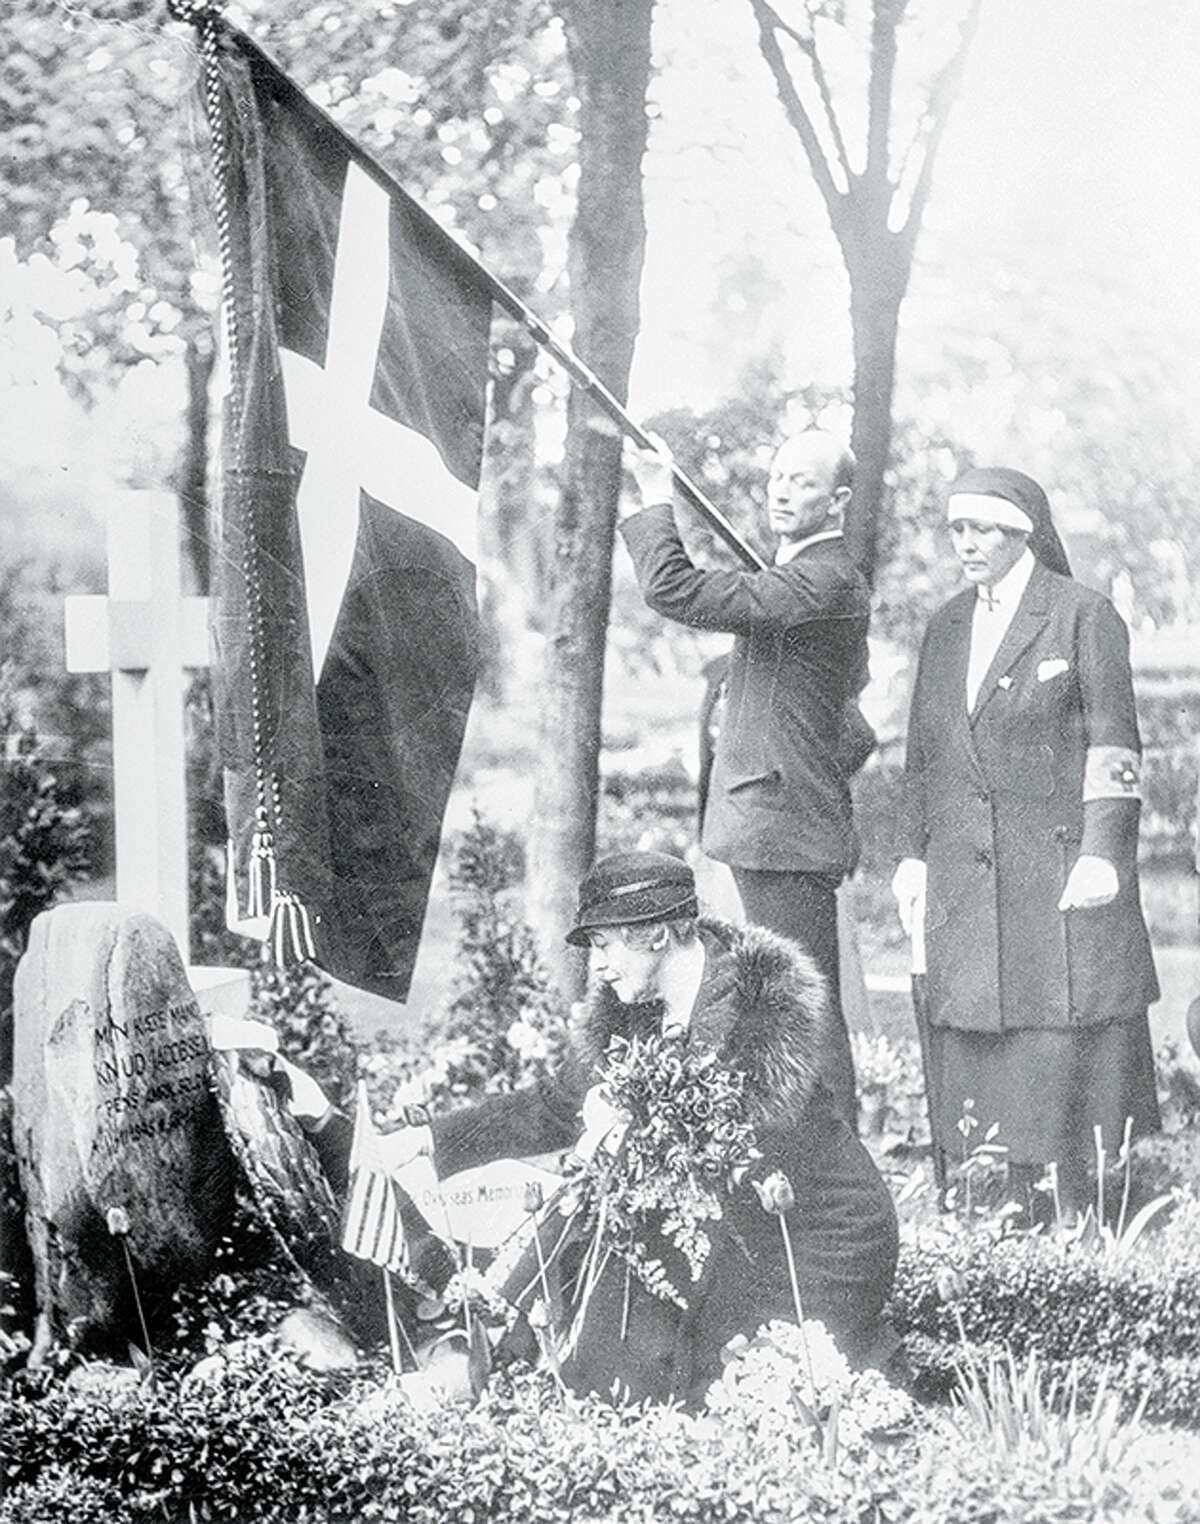 Kneeling before the tomb of a Danish war hero of 1895, Ruth Bryan Owen, first diplomatic minister of the United States, places a wreath and an American flag before the headstone of the patriotic shrine. The flag of Denmark flies overhead as a Danish Red Cross nurse (right) watches the ceremony.